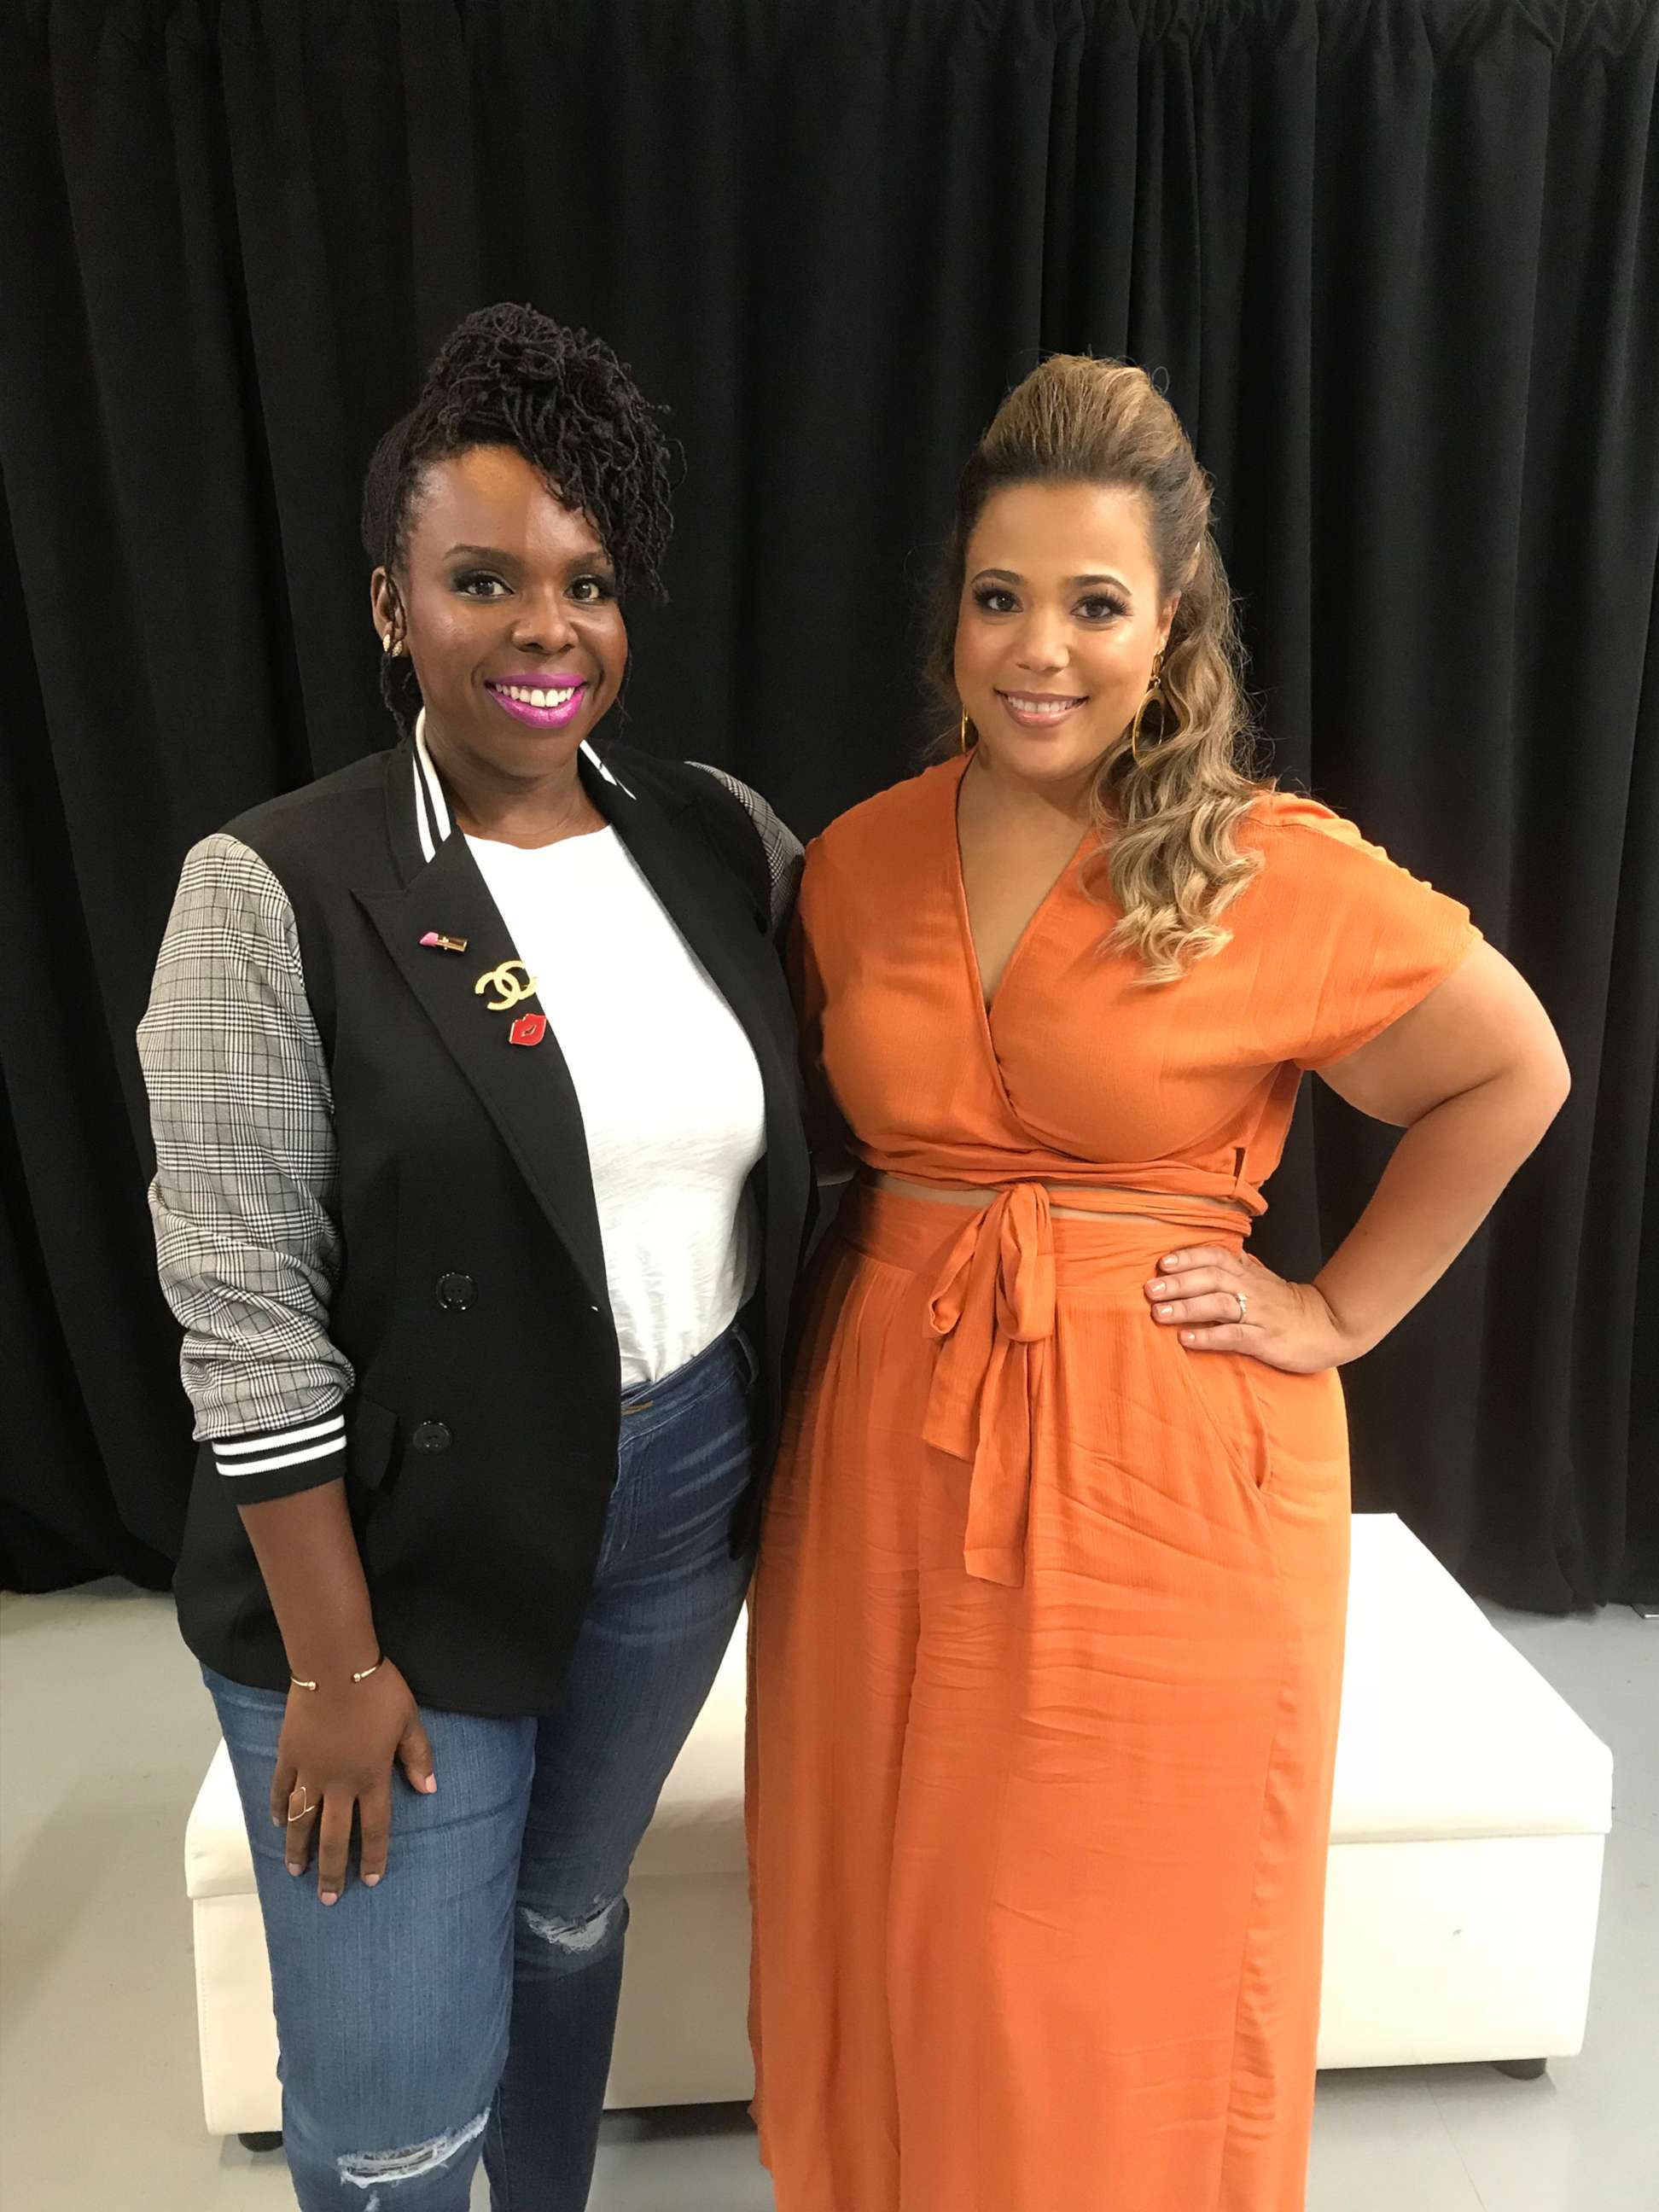 PHOTO: Co-founders of theCURVYcon Chastity Garner and Cece Olisa are pictured at theCURVYcon event in New York, Sept. 8, 2018.